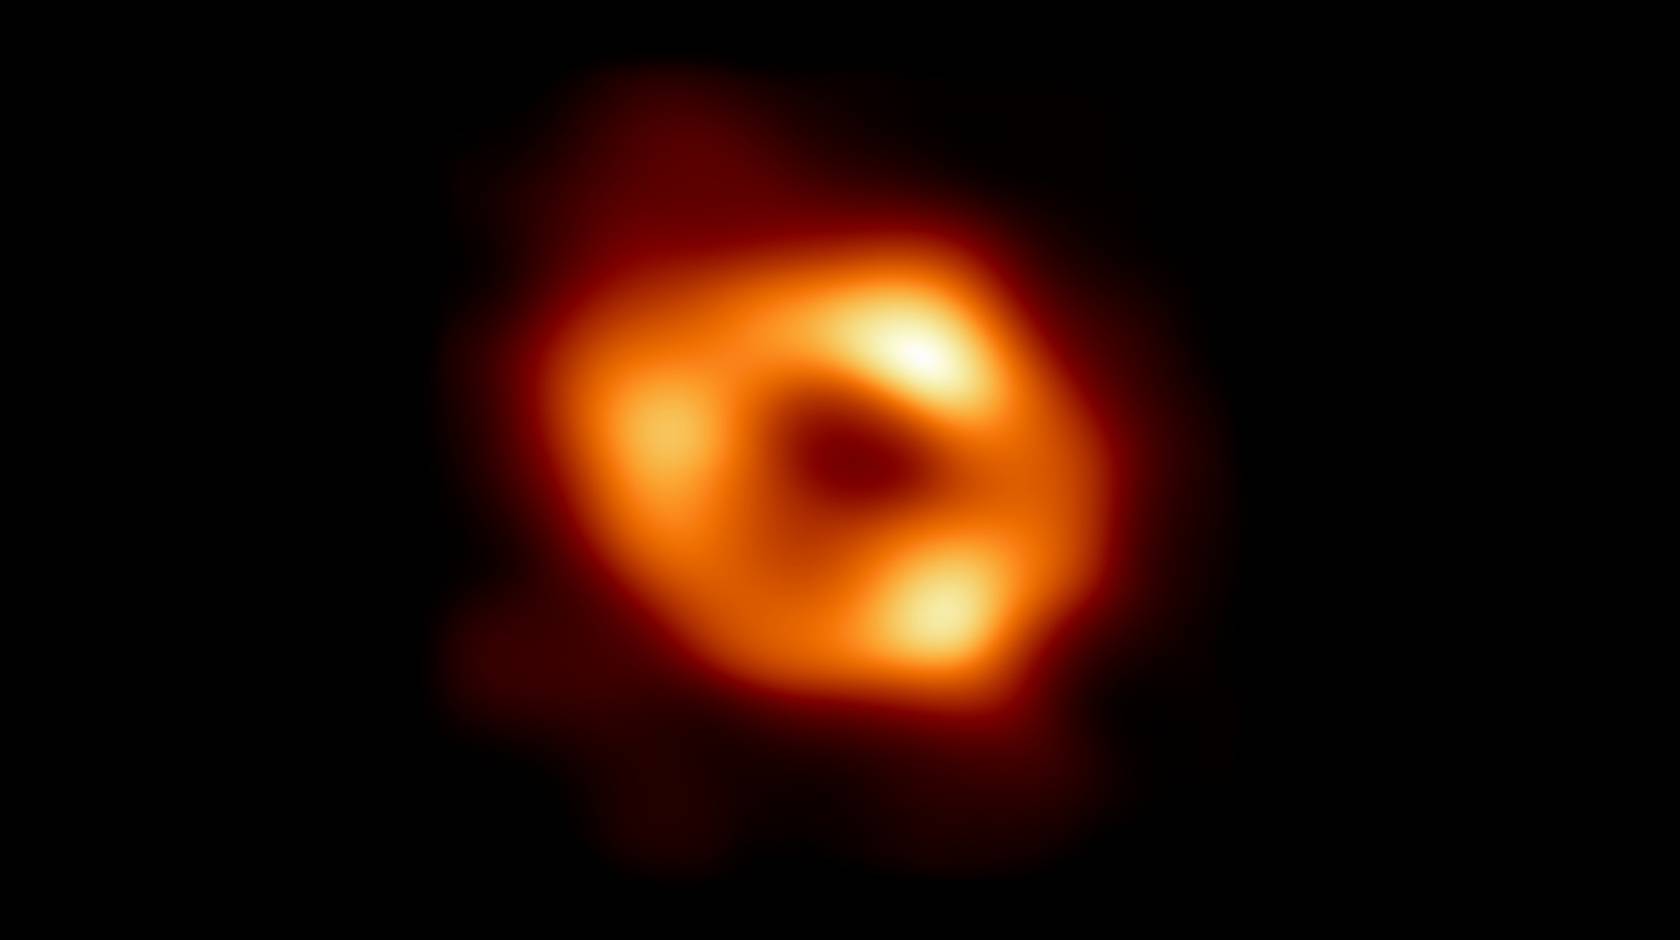 The first image of Sagittarius A* (or Sgr A* for short), the supermassive black hole at the centre of our galaxy. Fiery red circular object on black